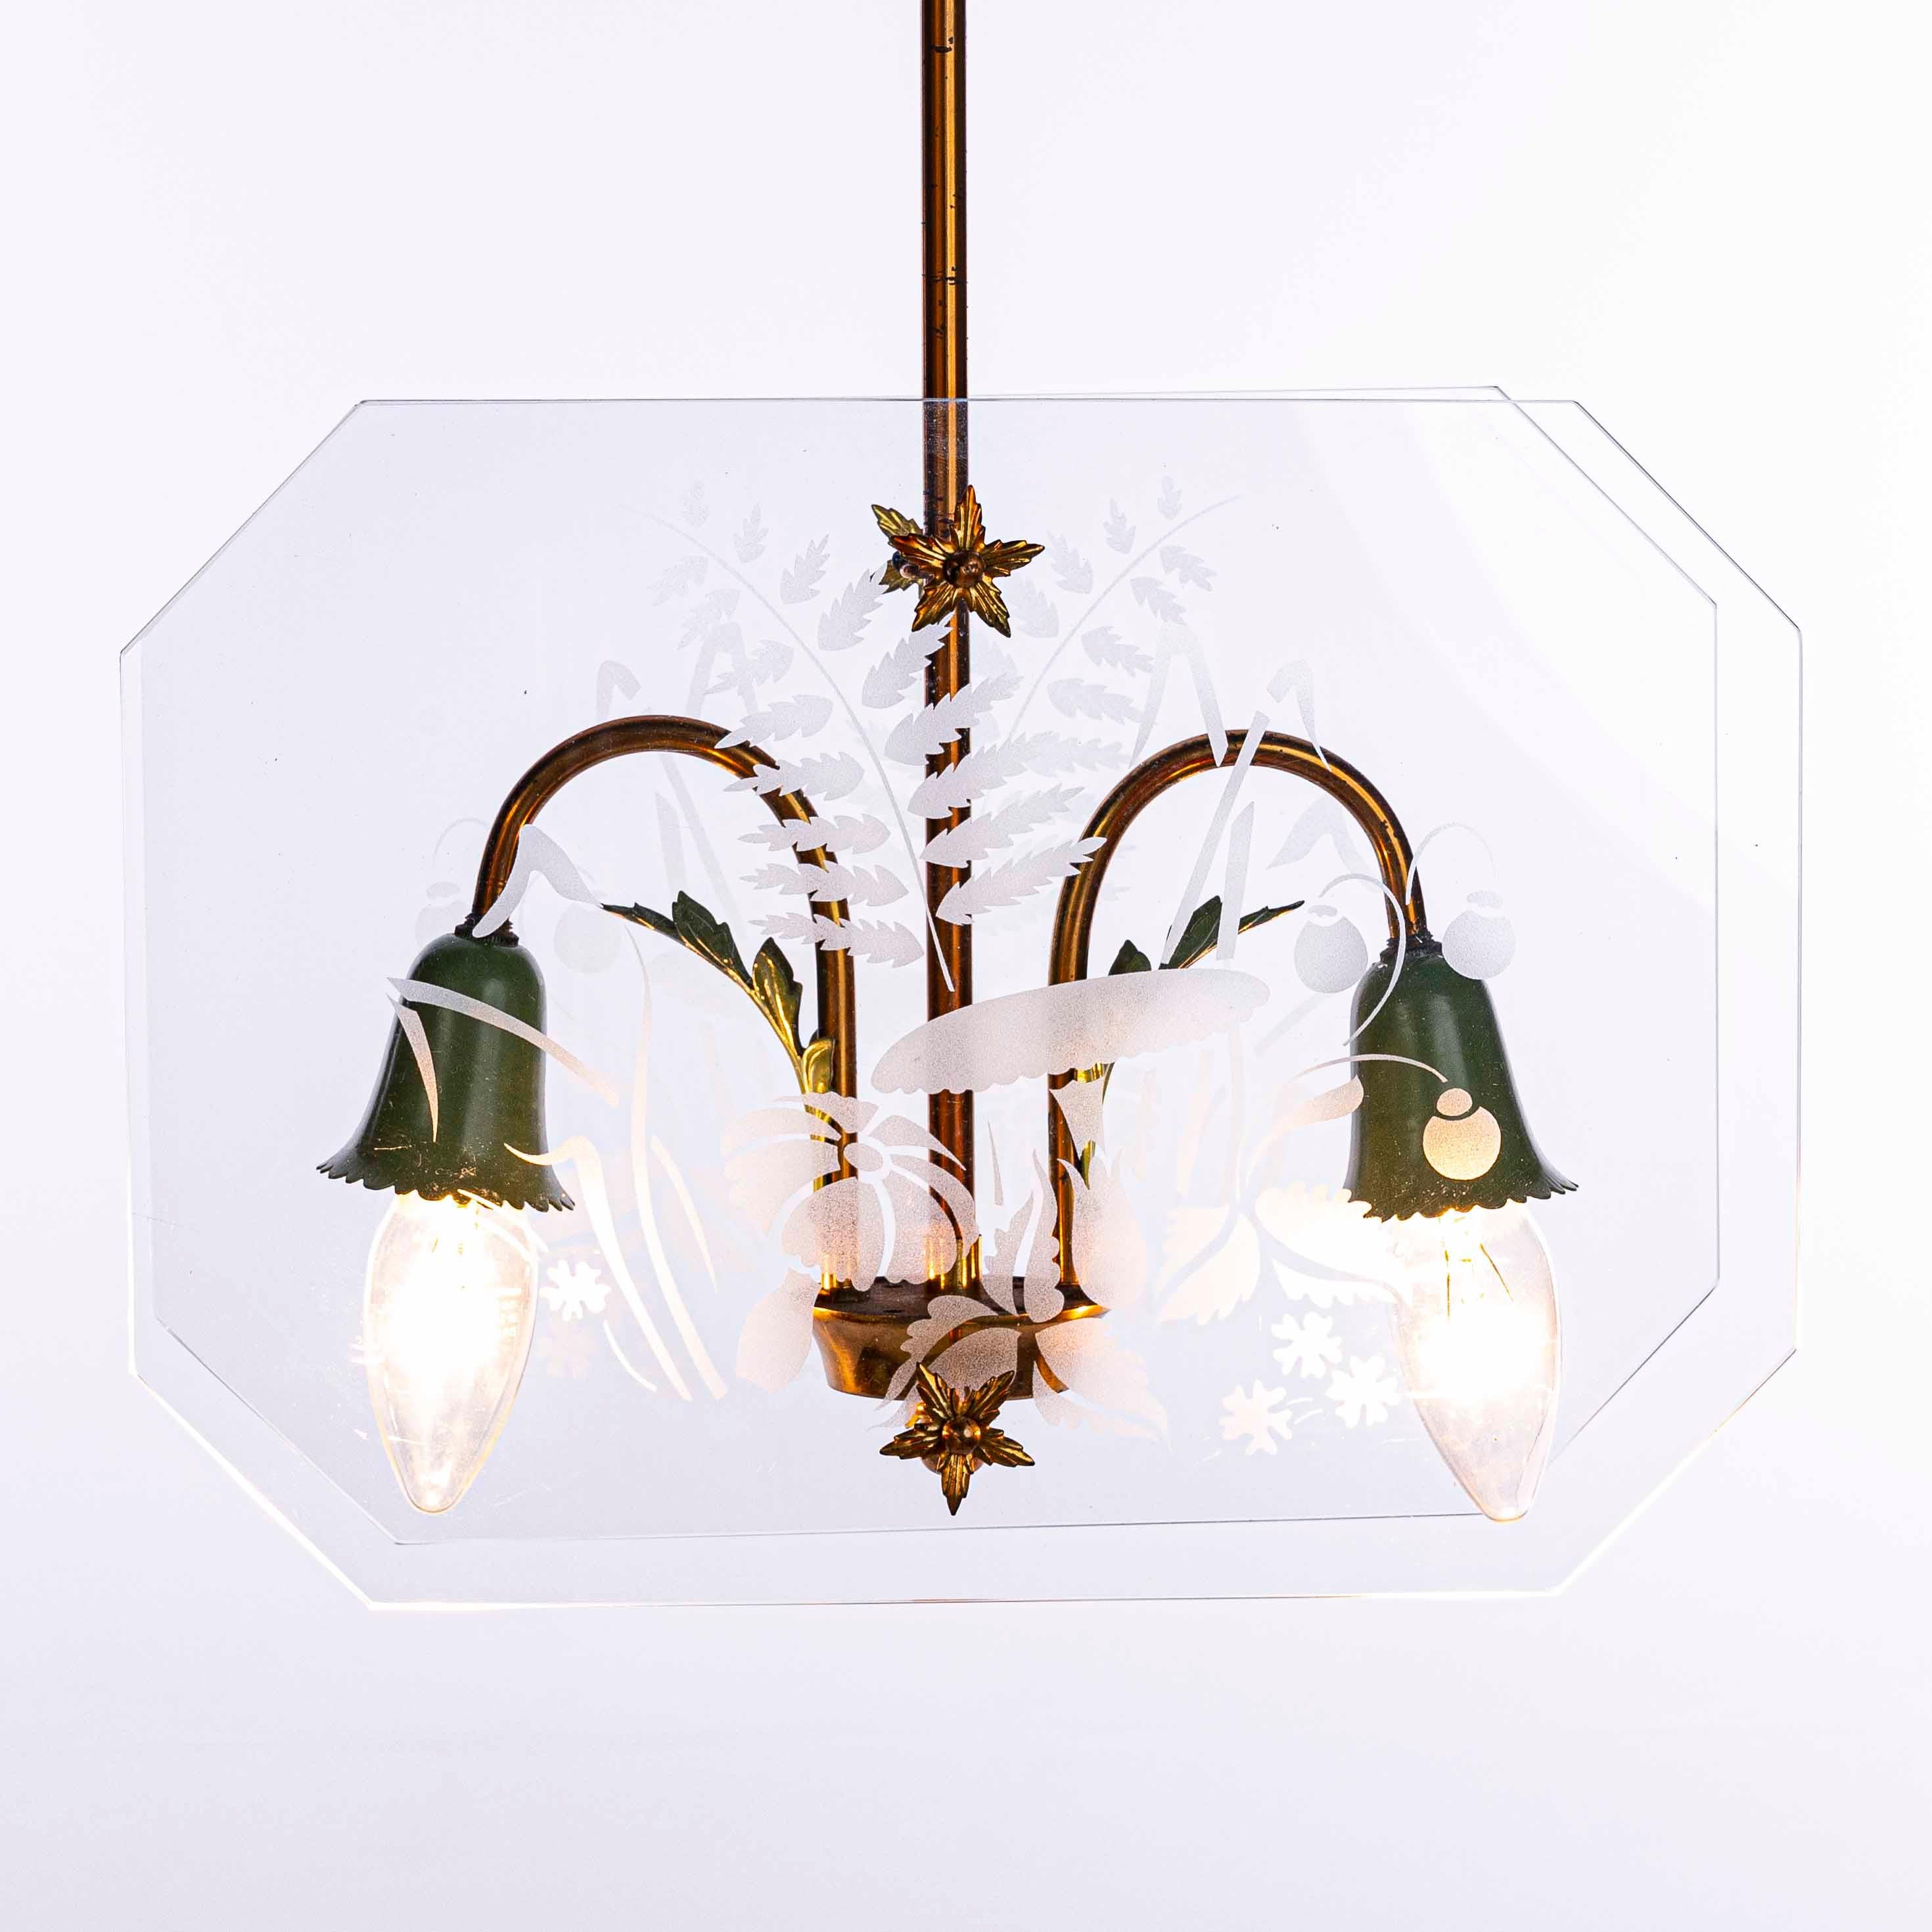 Cute two-light lantern in style of Fontana Arte. Consists of two etched glass panels with a flower pattern, a brass frame and green colored lamp E14 socket.
Measures: Glass panel 33cm width and 24 cm height. Minor scratches on the panels not so to